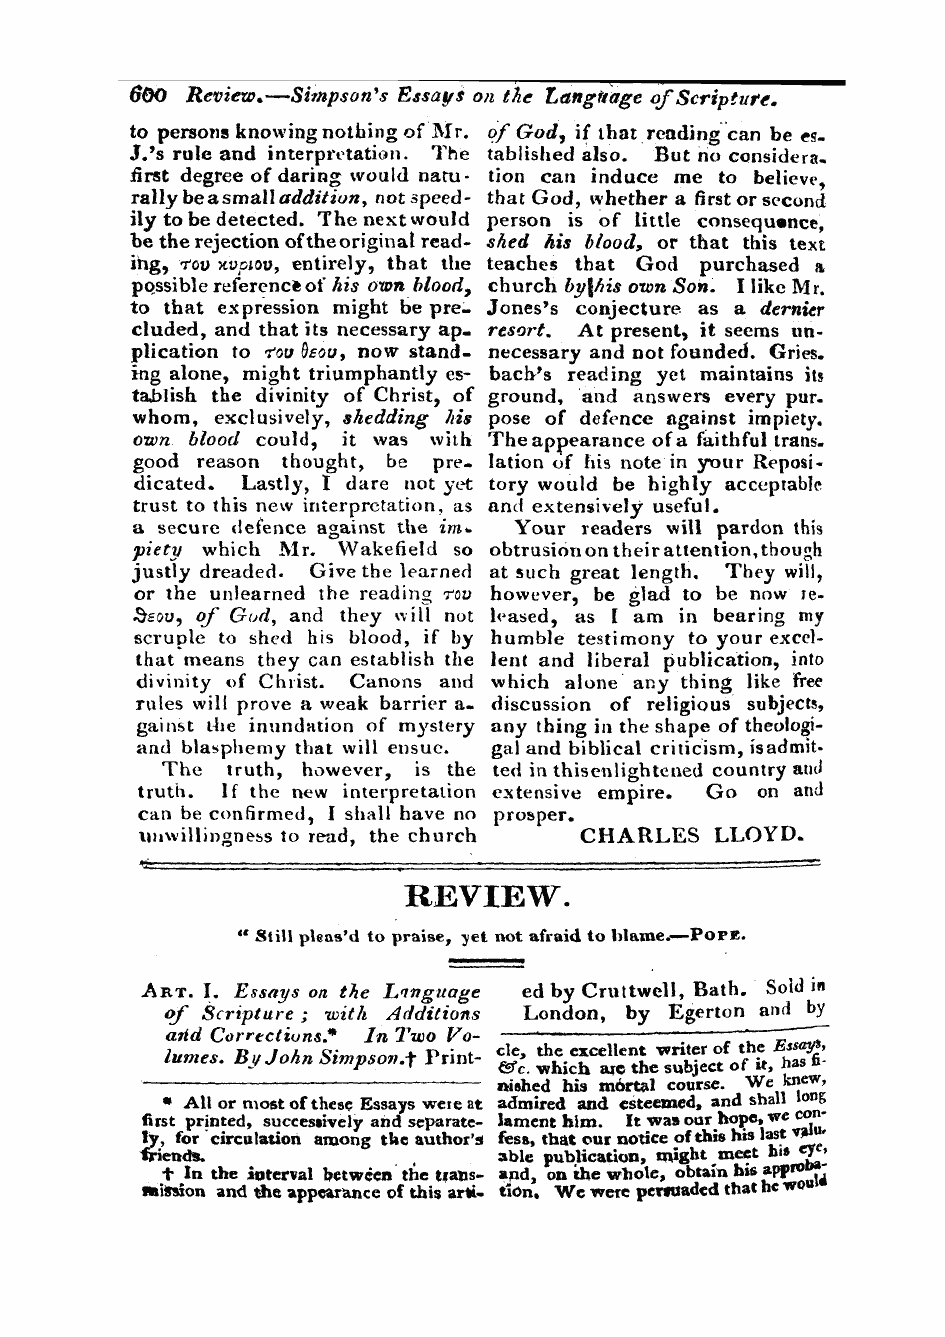 Monthly Repository (1806-1838) and Unitarian Chronicle (1832-1833): F Y, 1st edition - Review. " Still Pleas'd To Praise, 3/Et Not Afraid To Blame. — Pope.